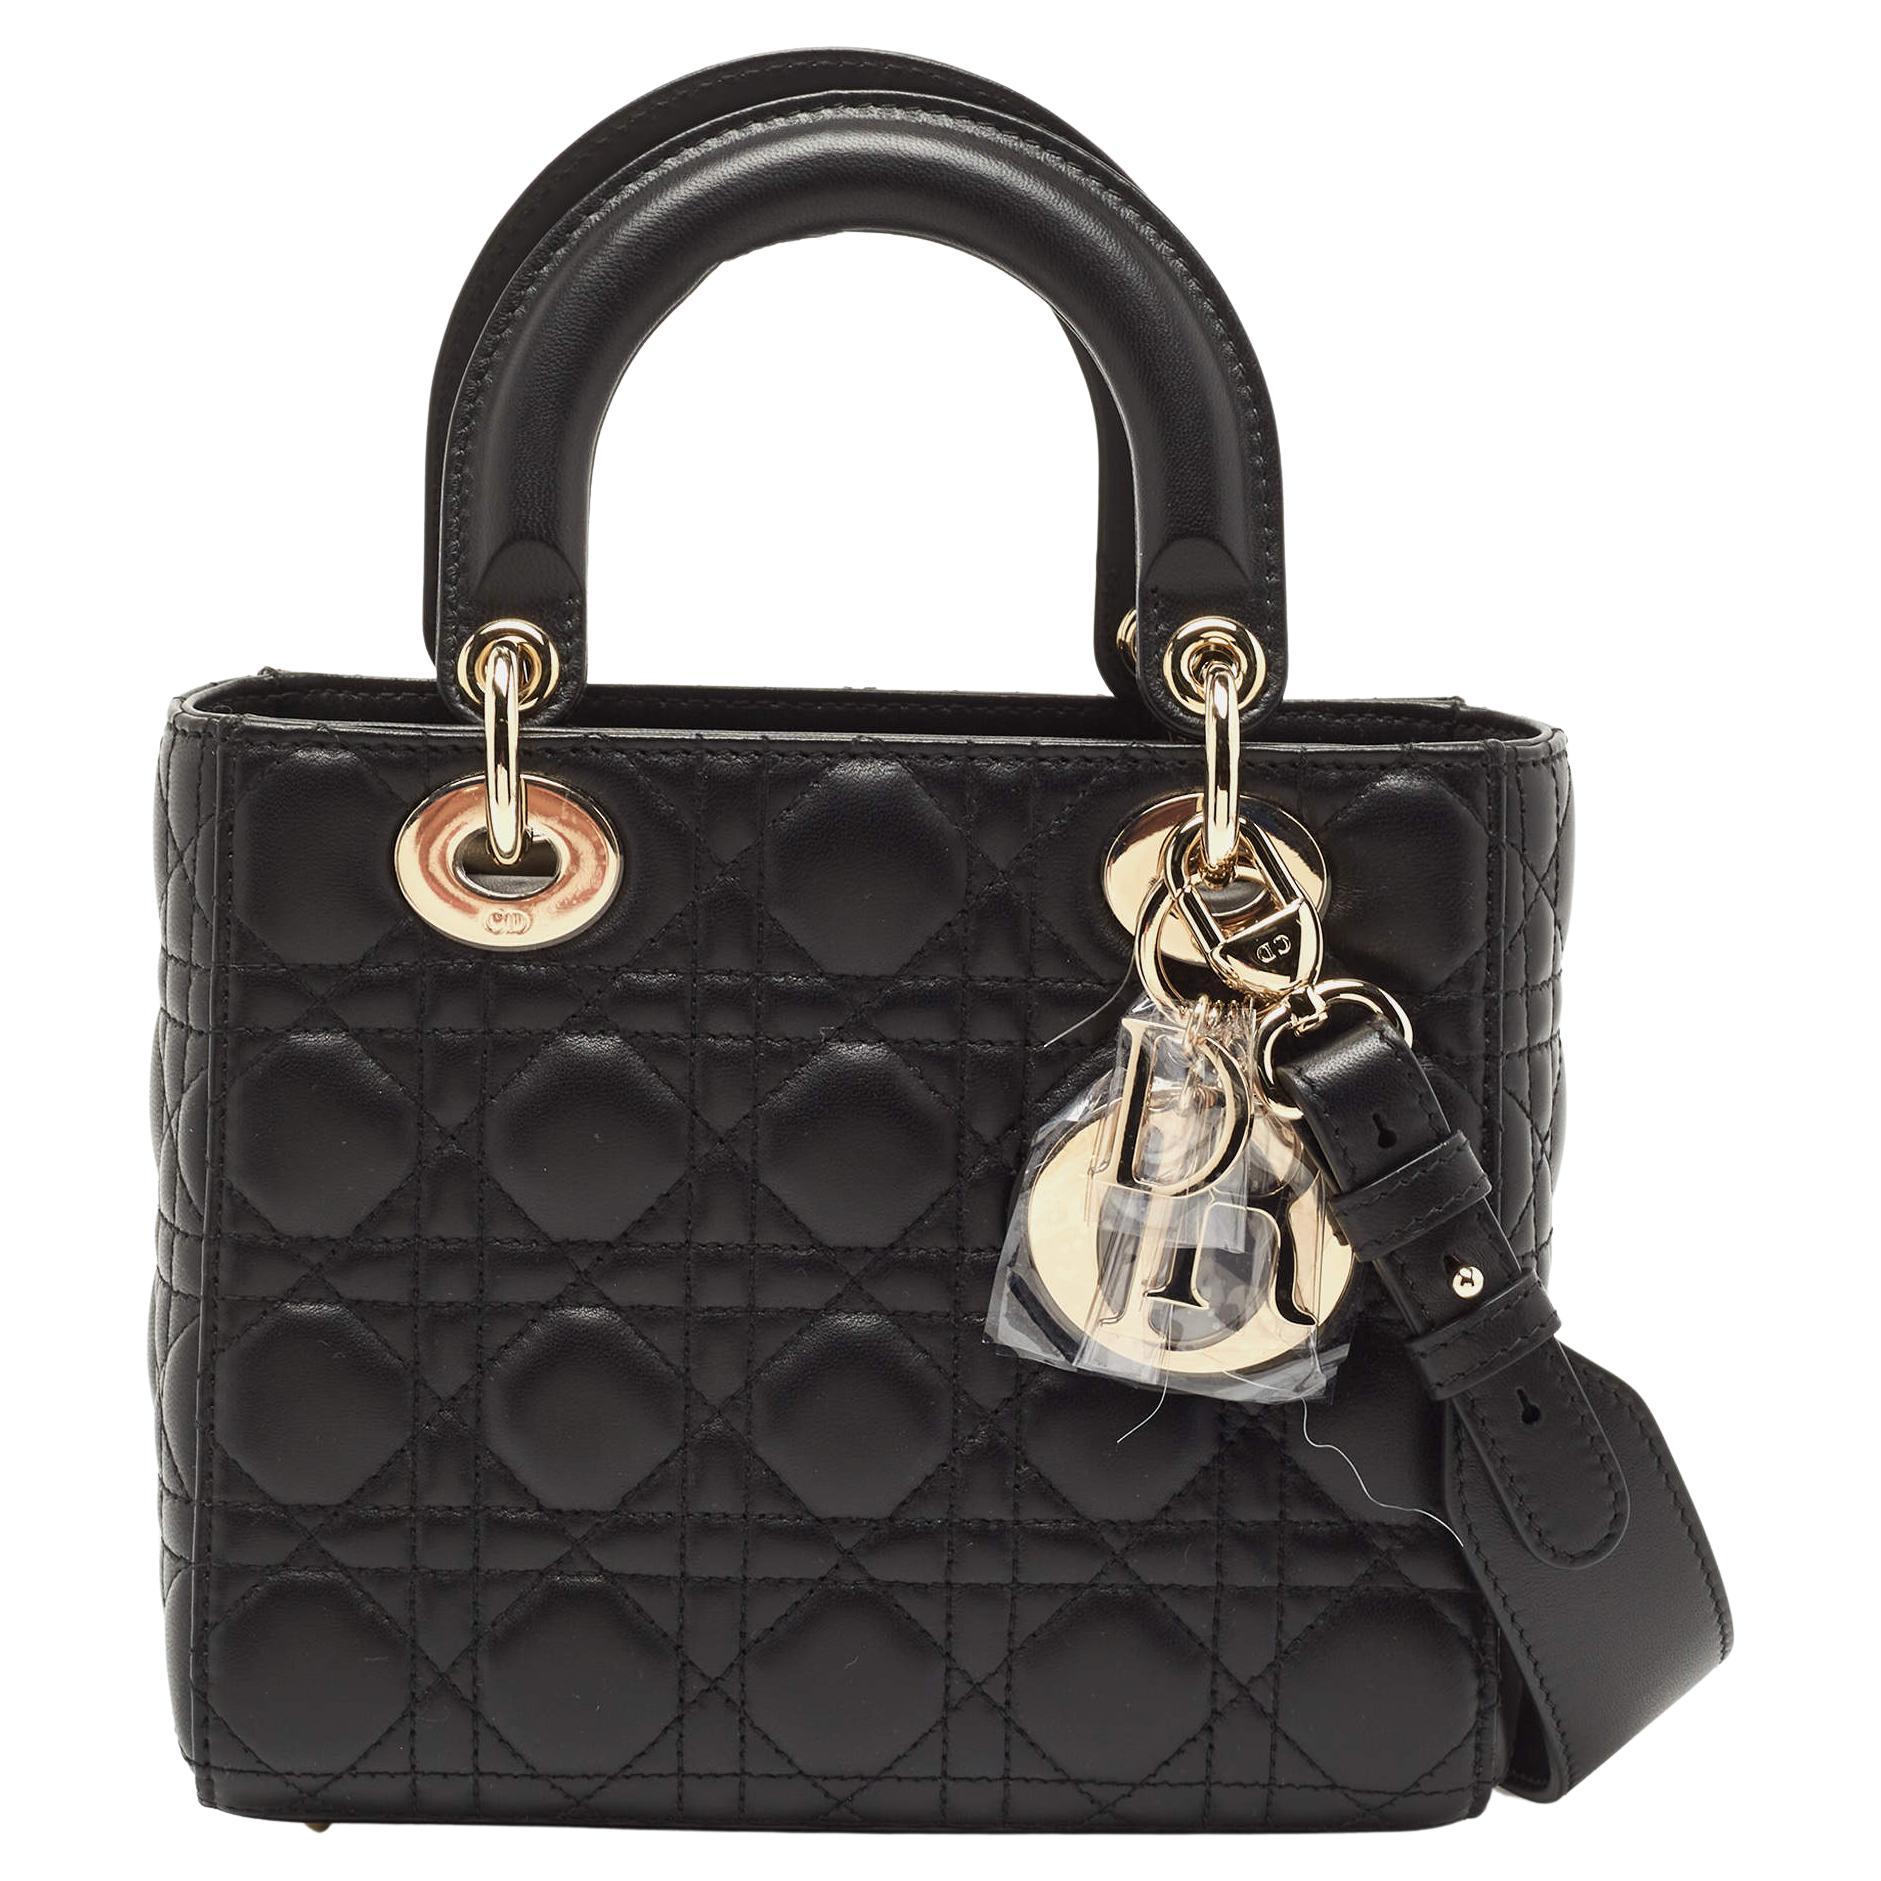 Dior Black Cannage Leather Small My ABCDior Lady Dior Tote